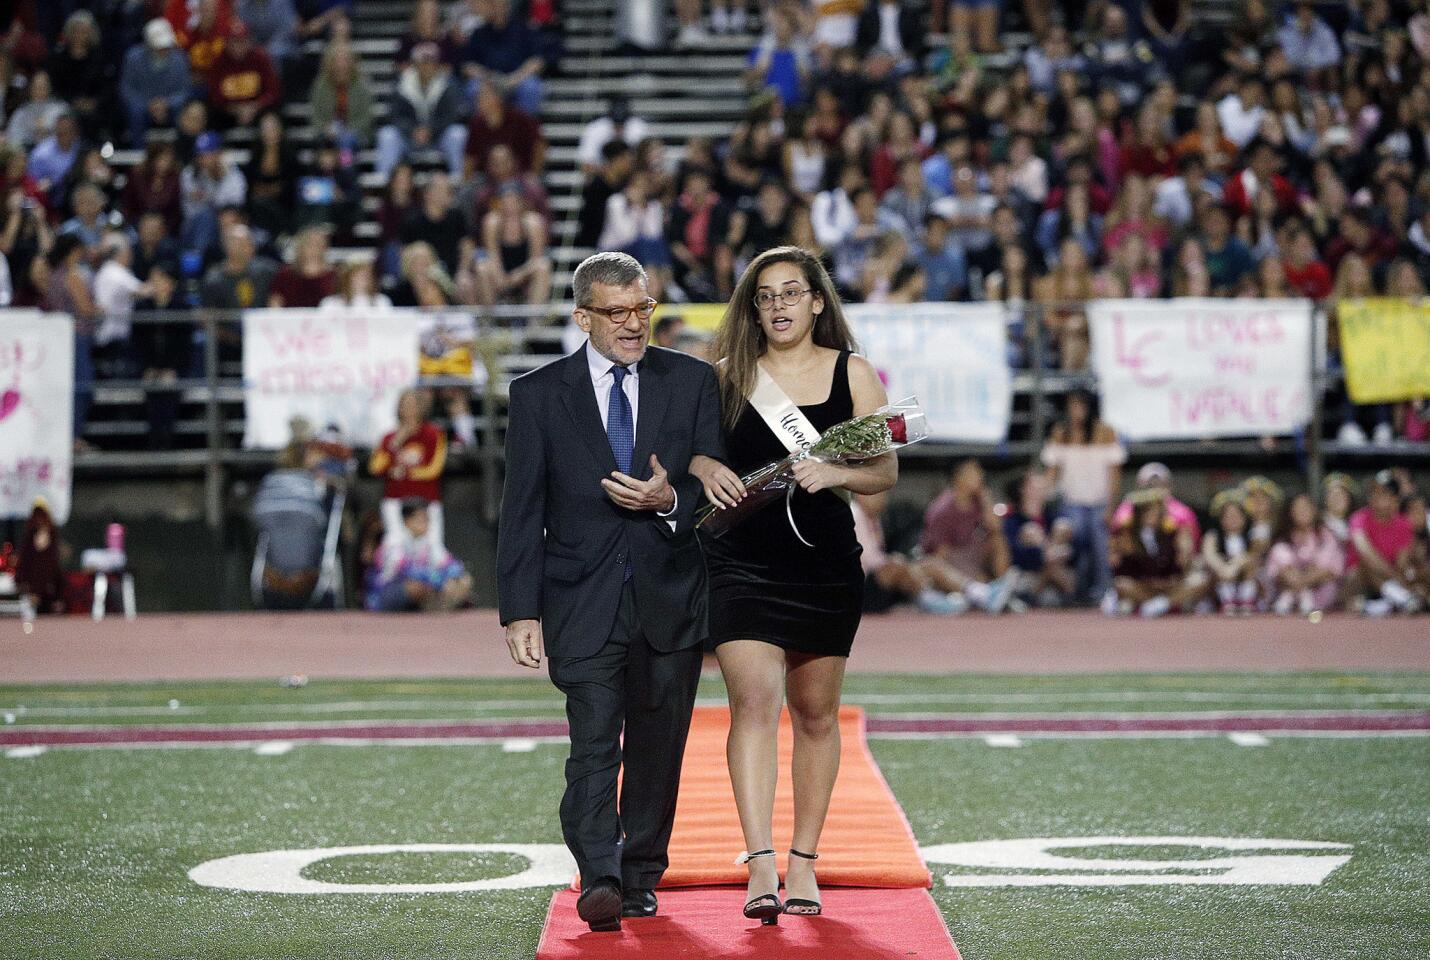 Photo Gallery: La Canada homecoming queen announced at halftime of football game